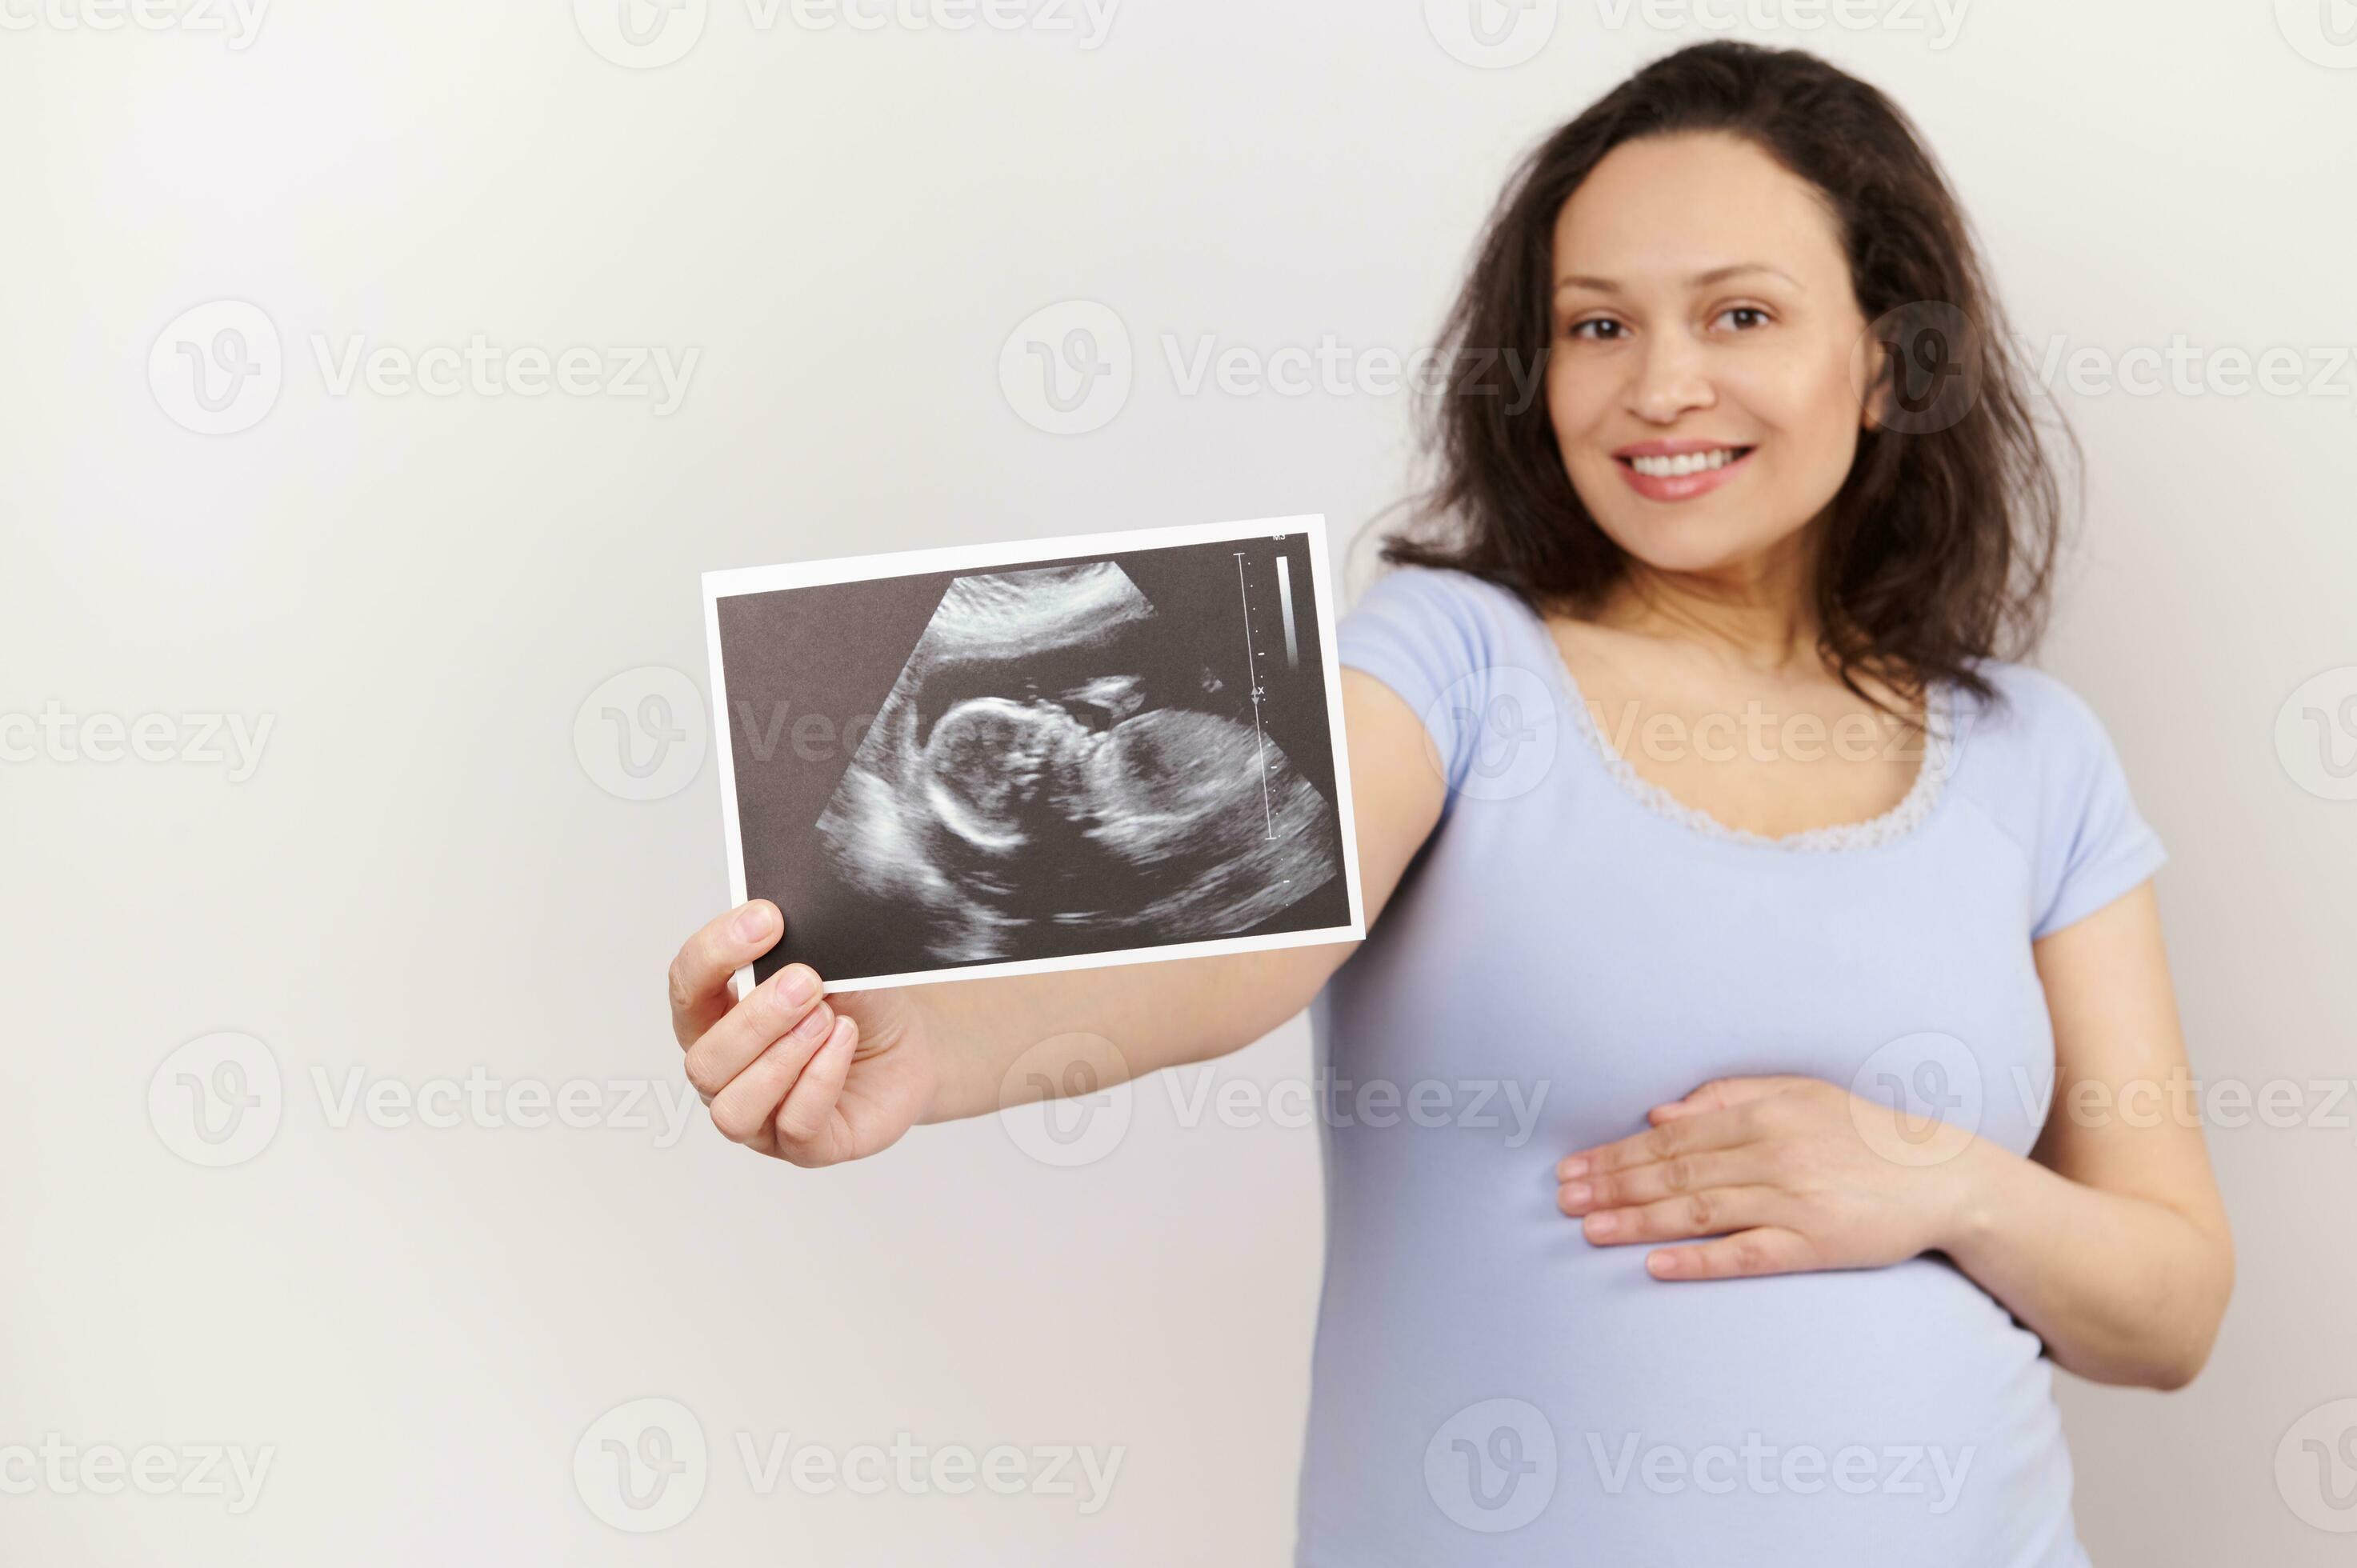 Focus on ultrasound scan image, baby sonography in the hand of a smiling  pregnant woman, isolated on white background 23730150 Stock Photo at  Vecteezy